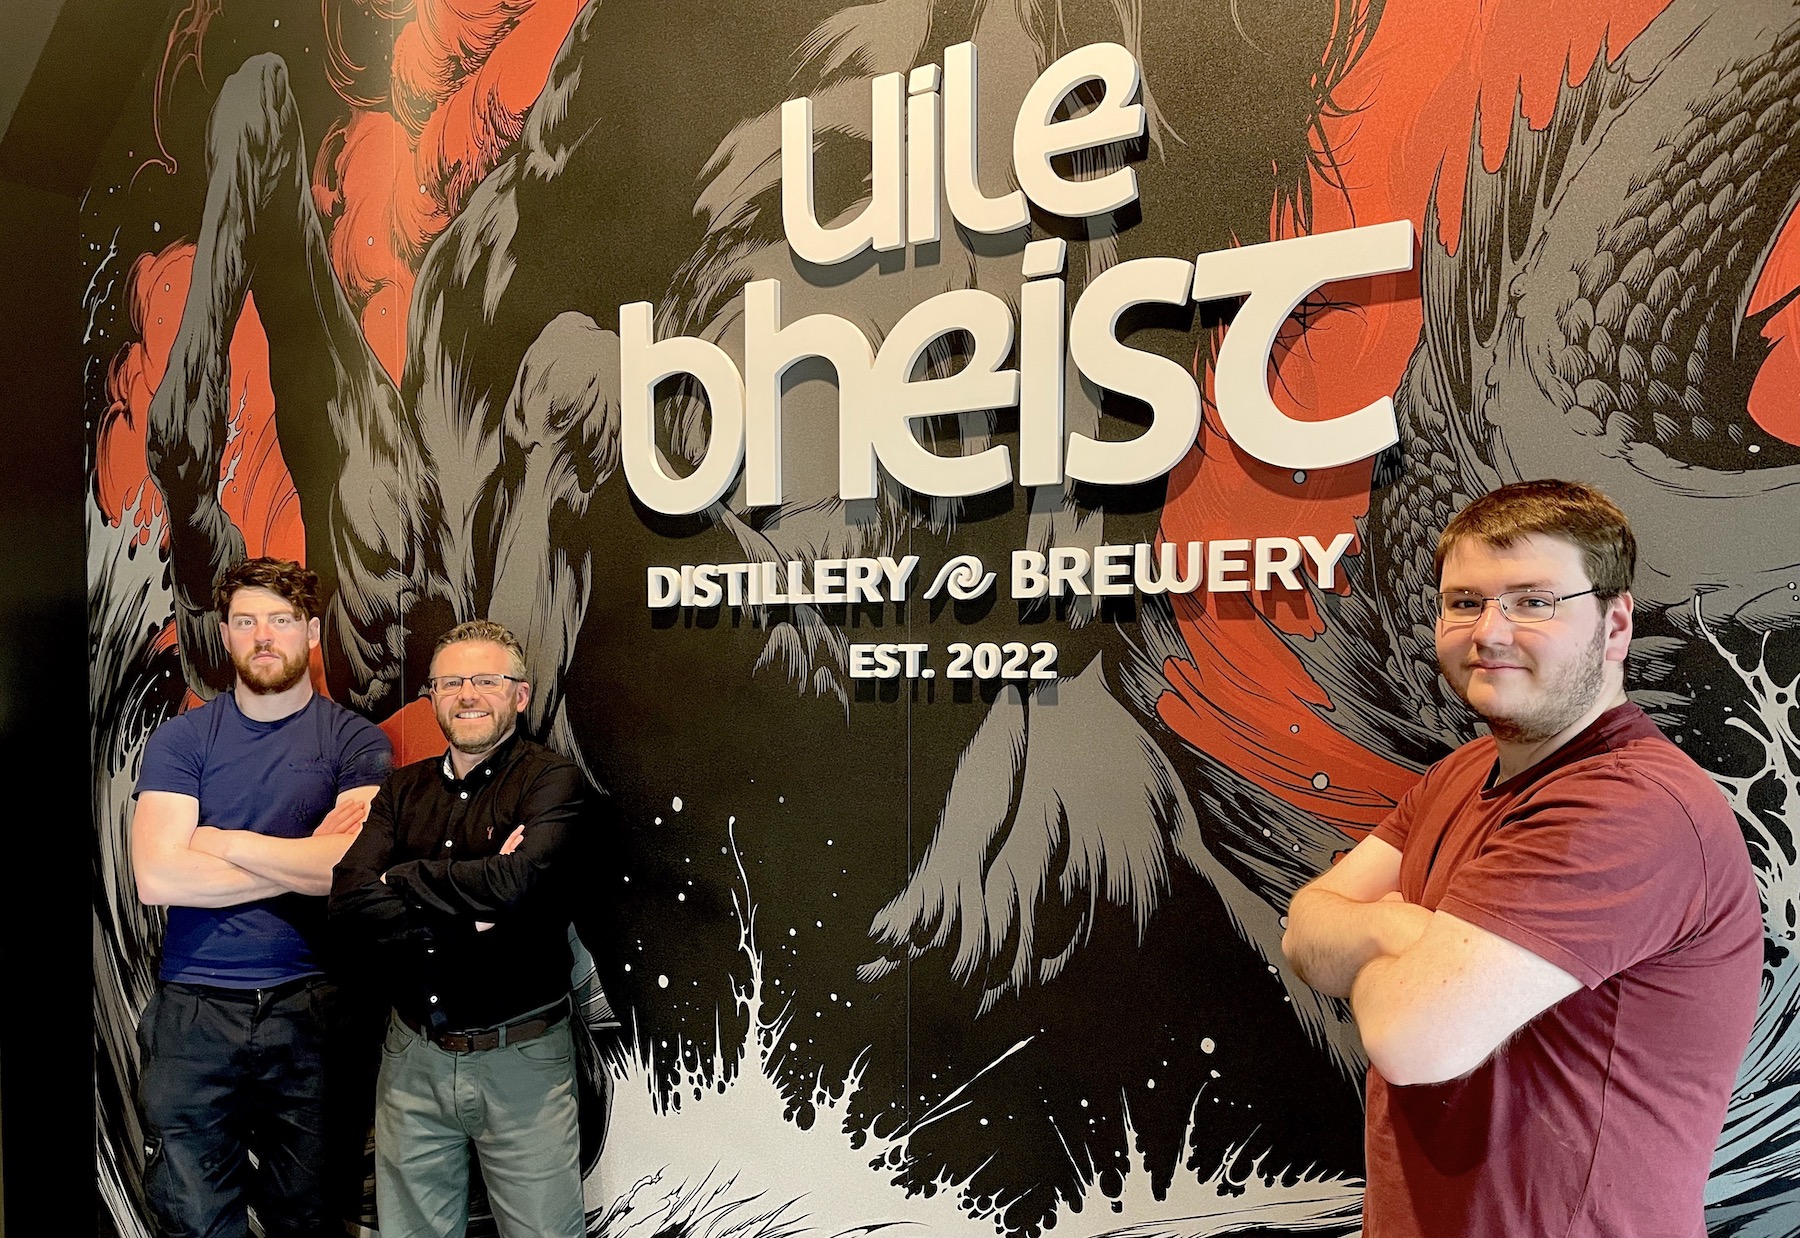 Newly launched Uile-bheist Distillery reveals trio of leadership appointments